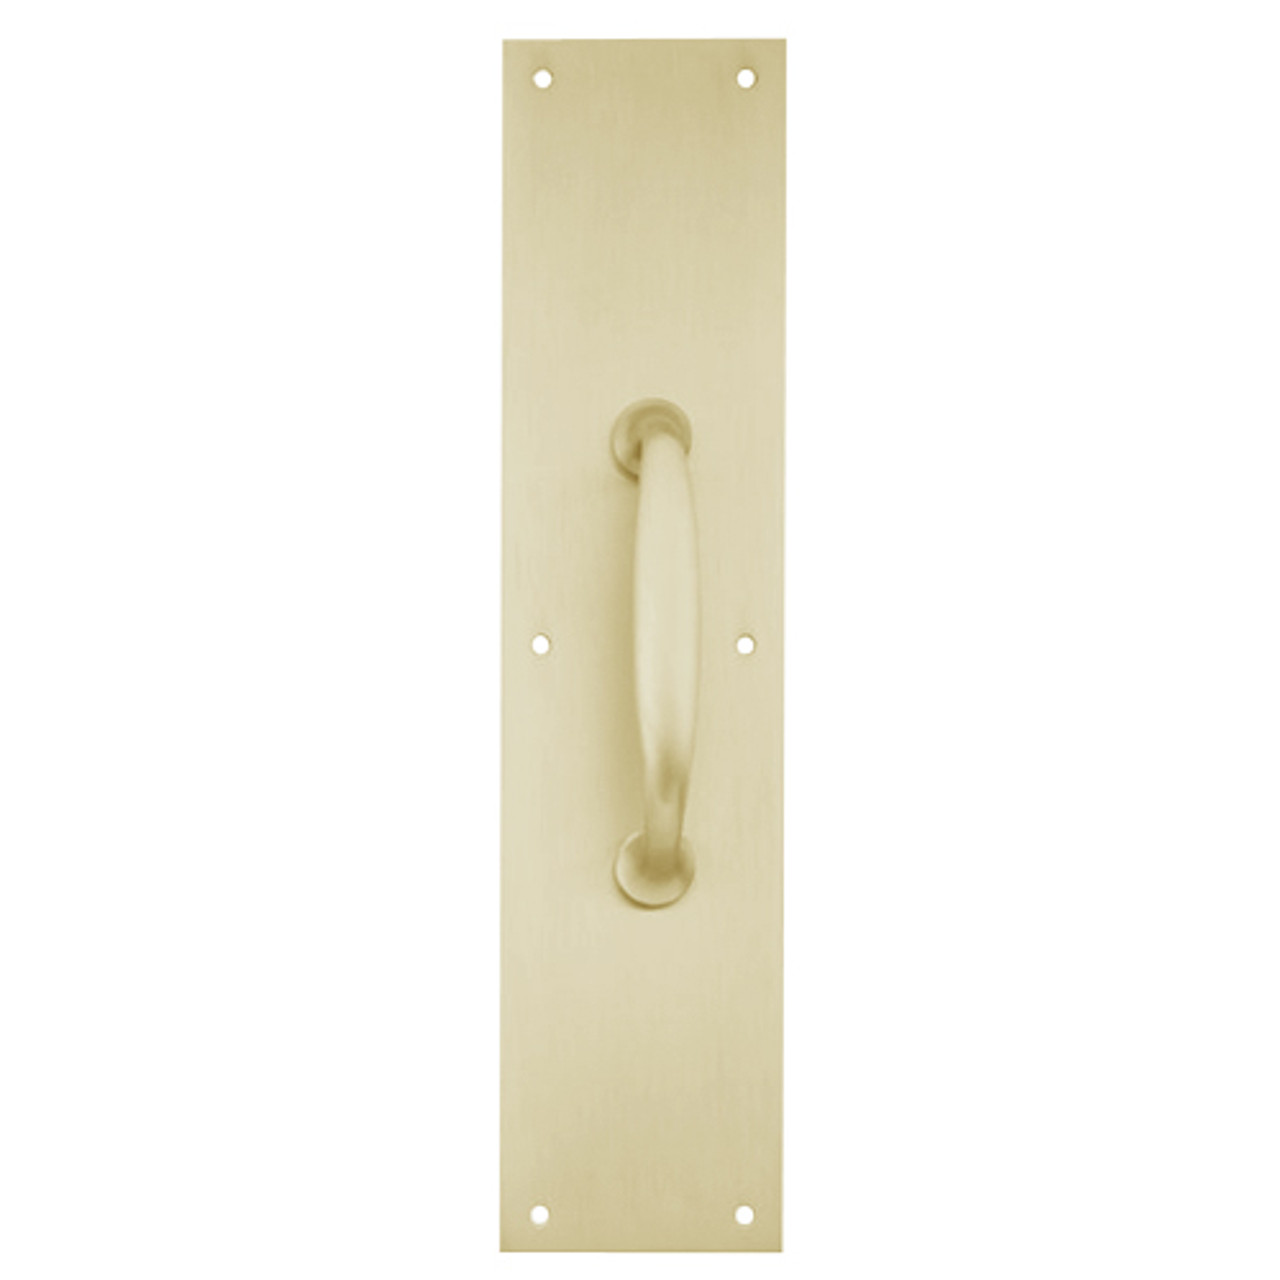 8311-5-US4-6x16 IVES Architectural Door Trim 6x16 Inch Pull Plate in Satin Brass